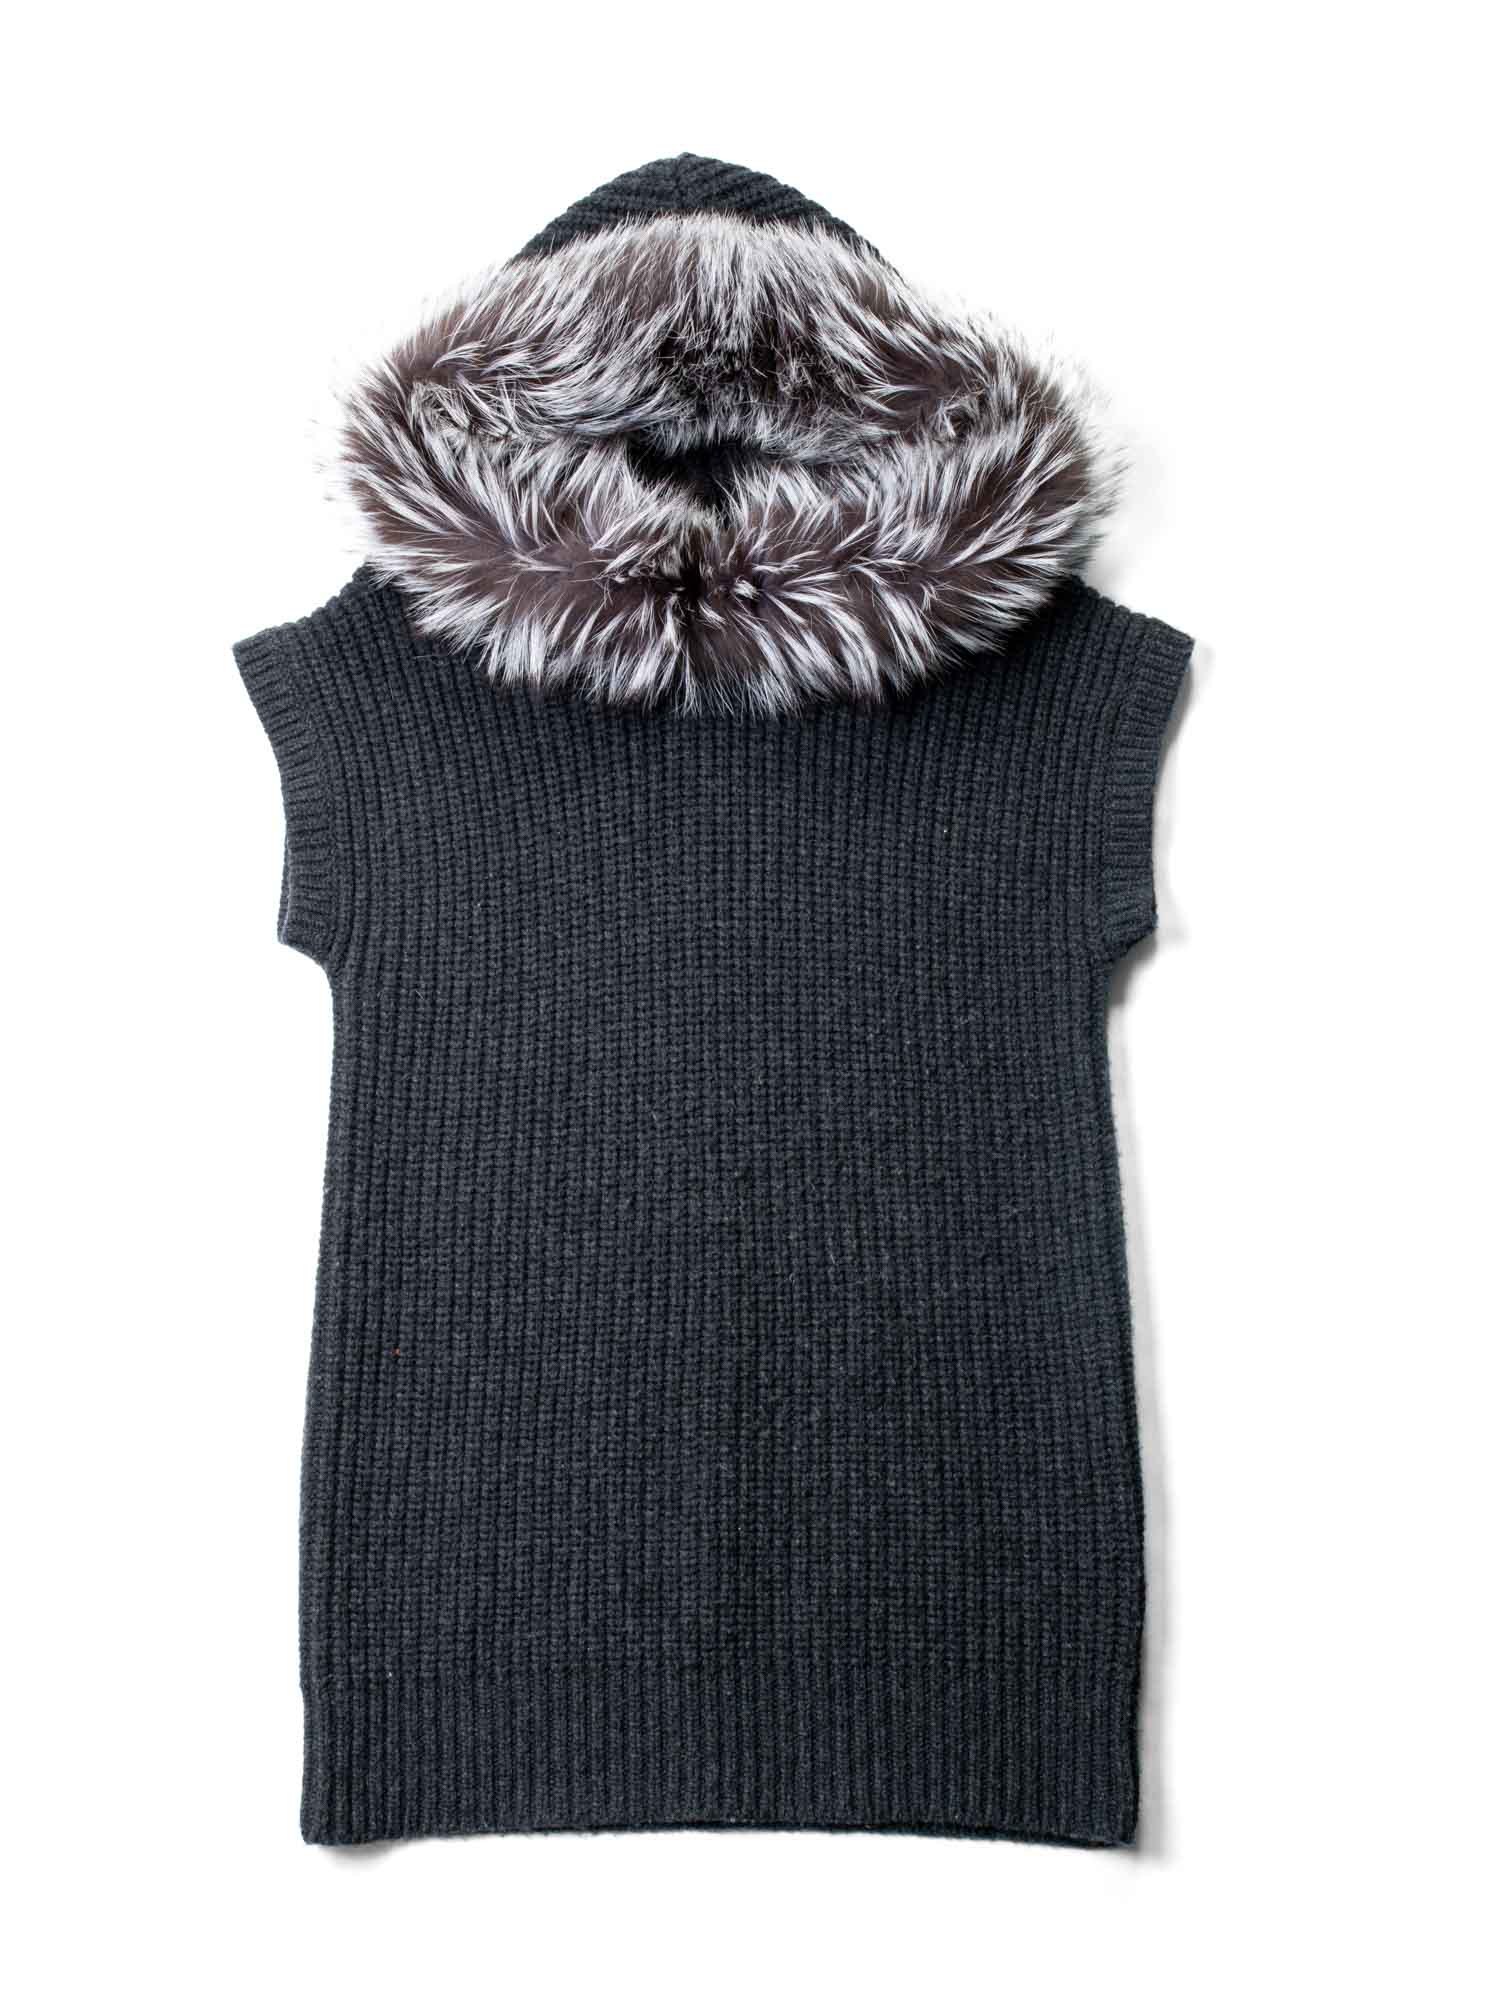 Michael Kors Knitted Cashmere Wool Fox Fur Hooded Vest Charcoal Grey